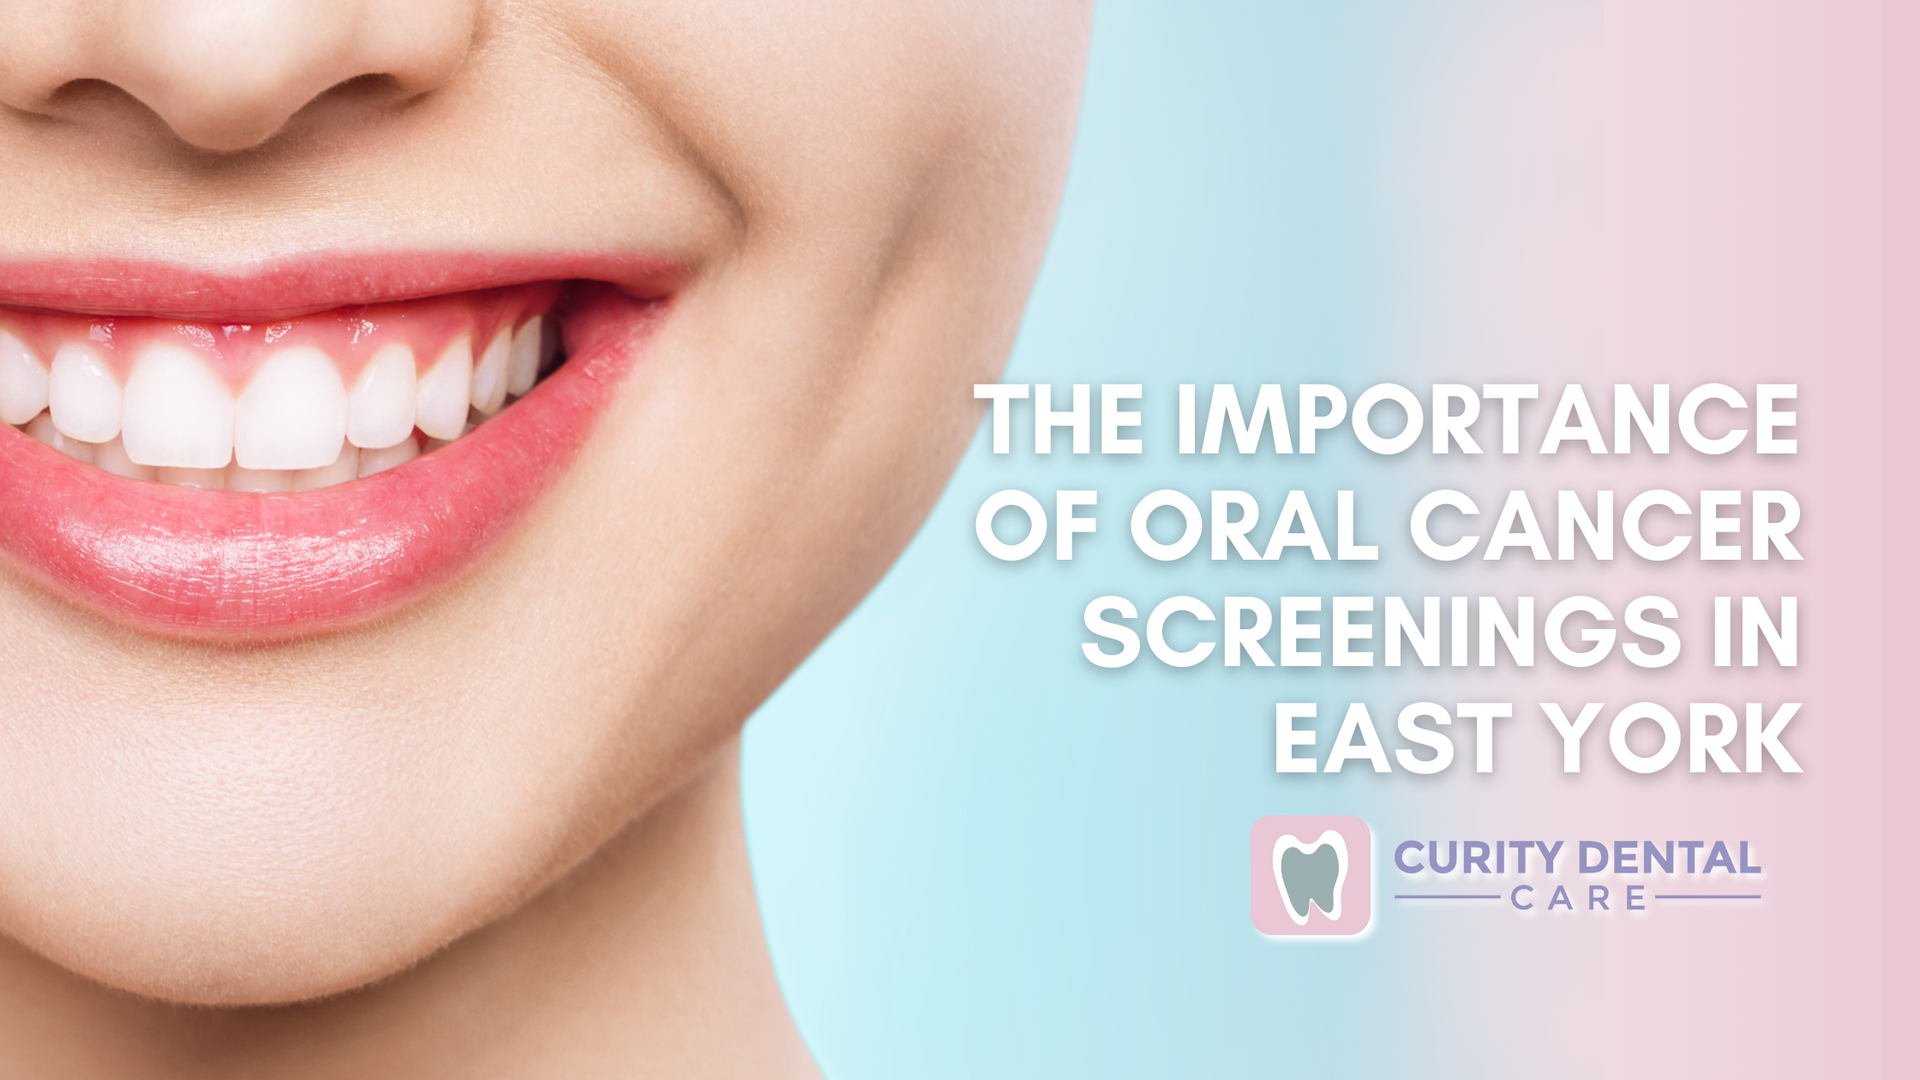 The importance of oral cancer screenings in east york